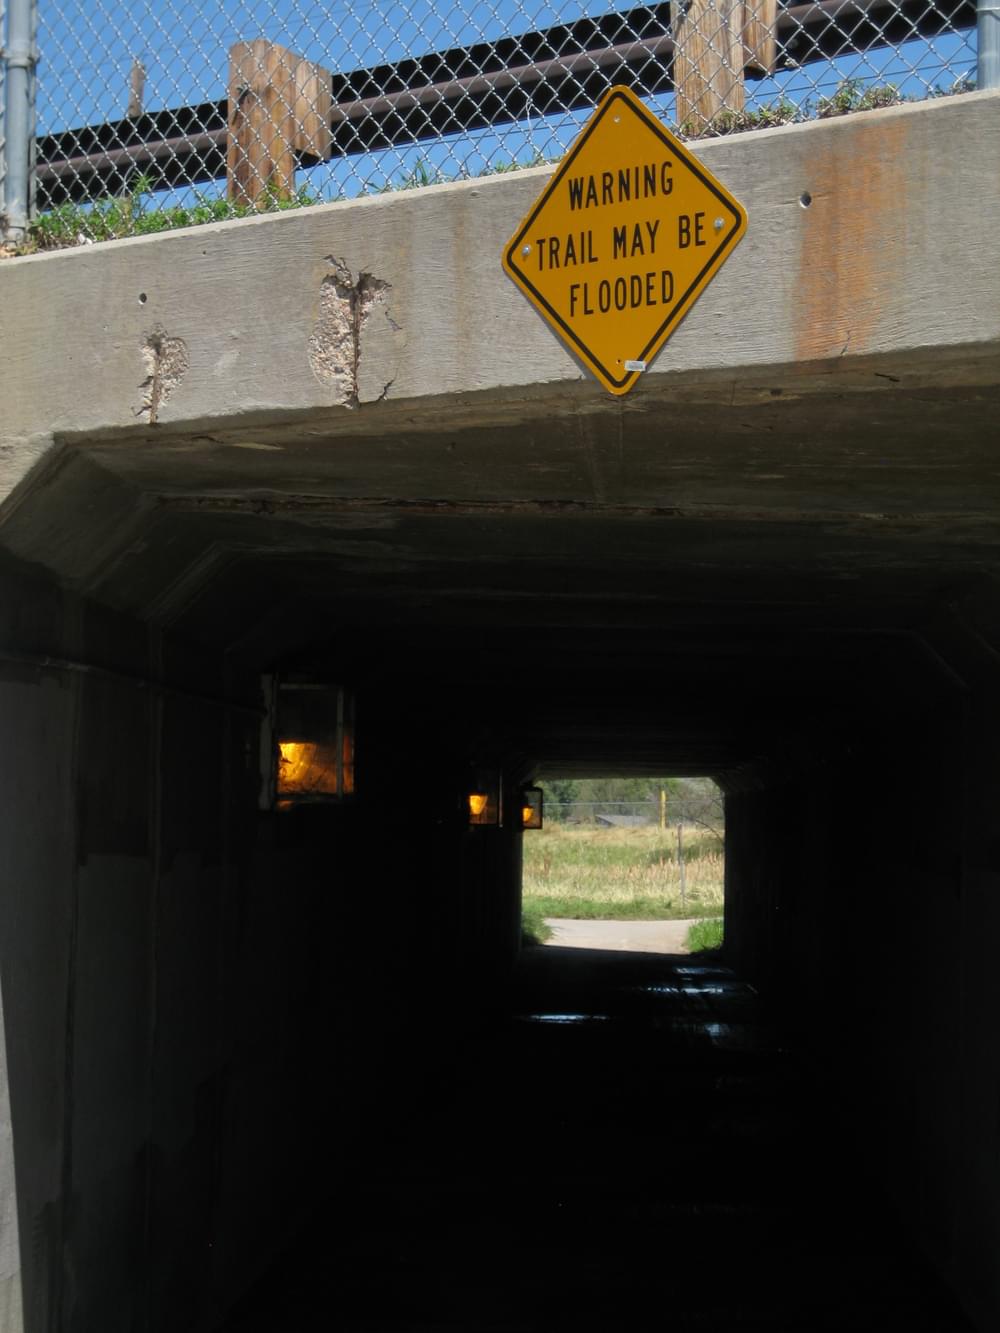 Another variation on flood warning signs, "Water may be on path" on Cherry Creek Trail; Denver, Colorado